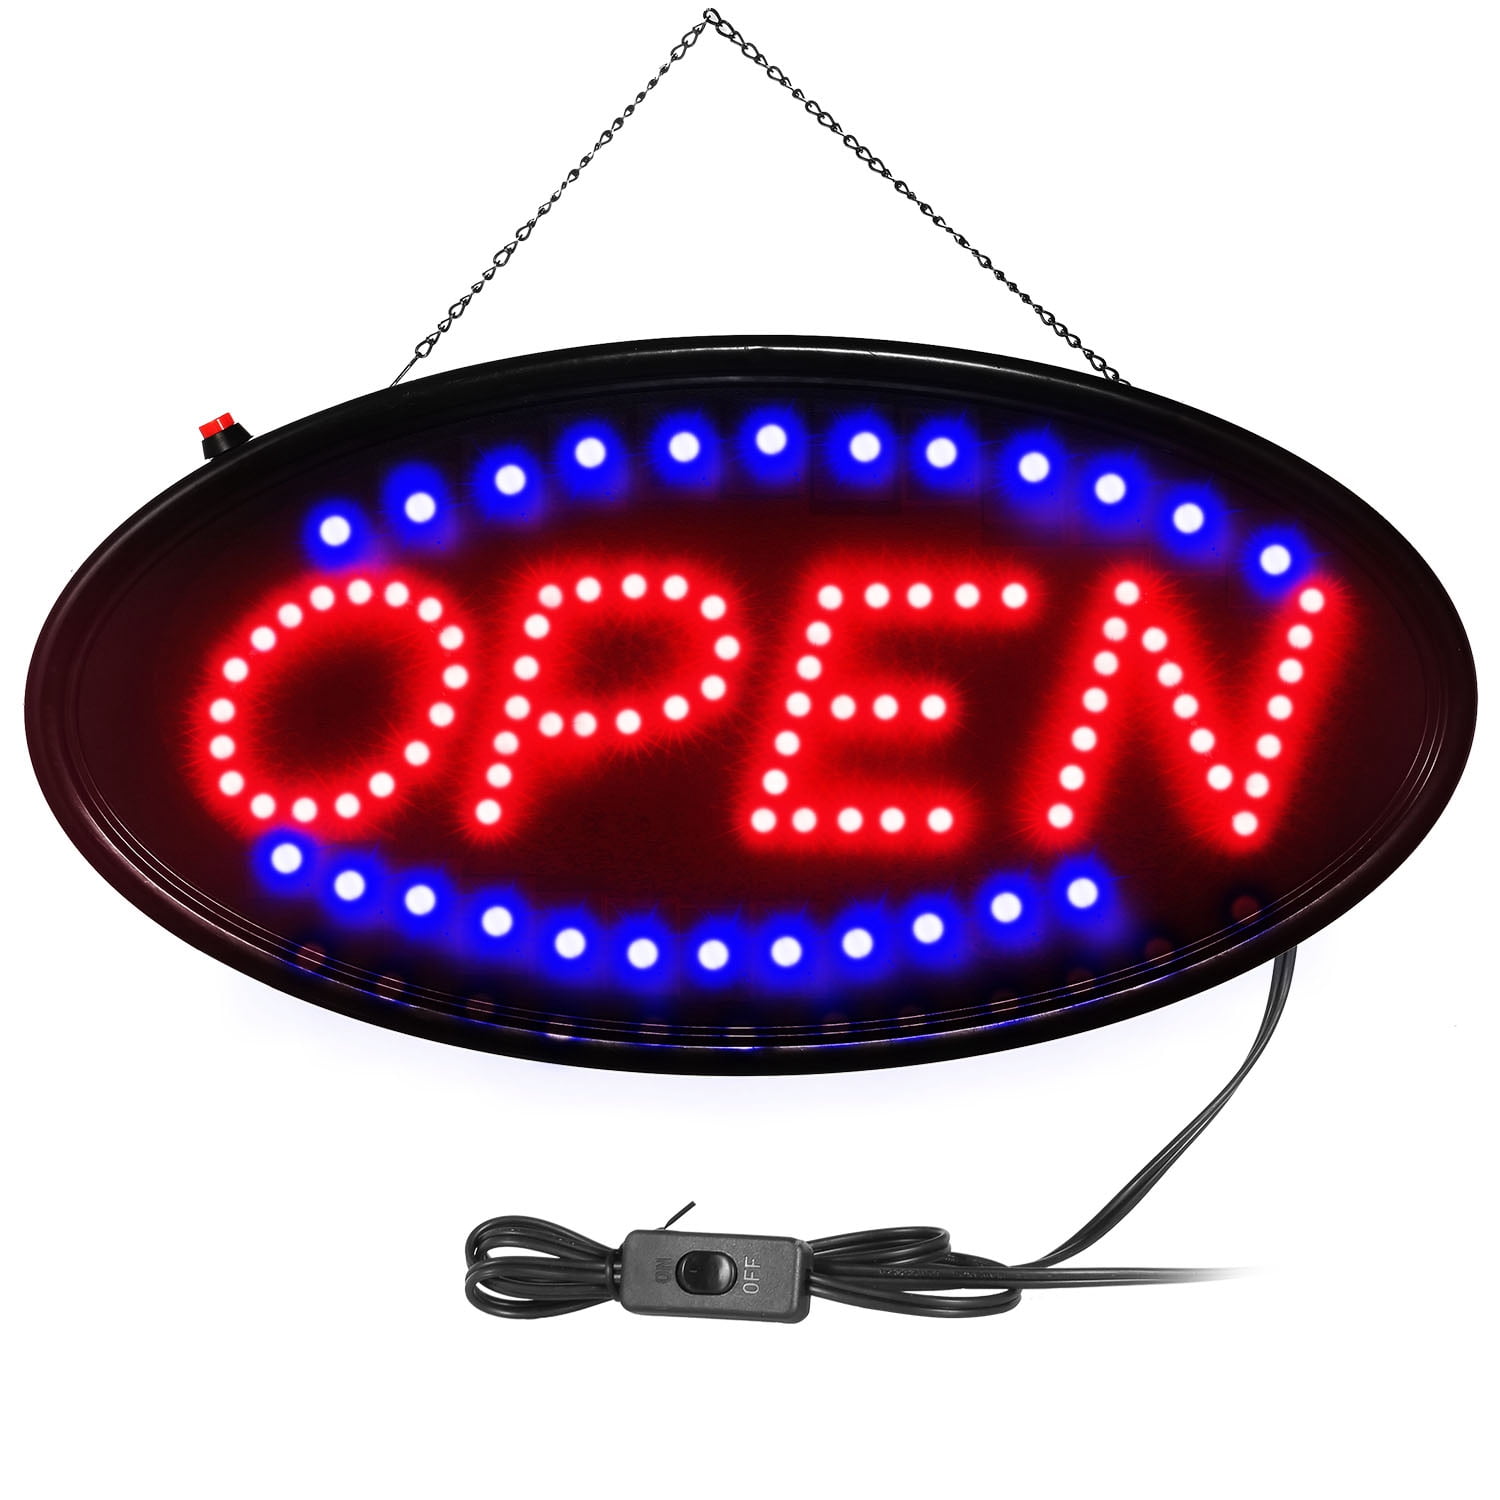 19"×10" Neon Animated LED Business Sign OPEN Light Bar Store Shop Display 